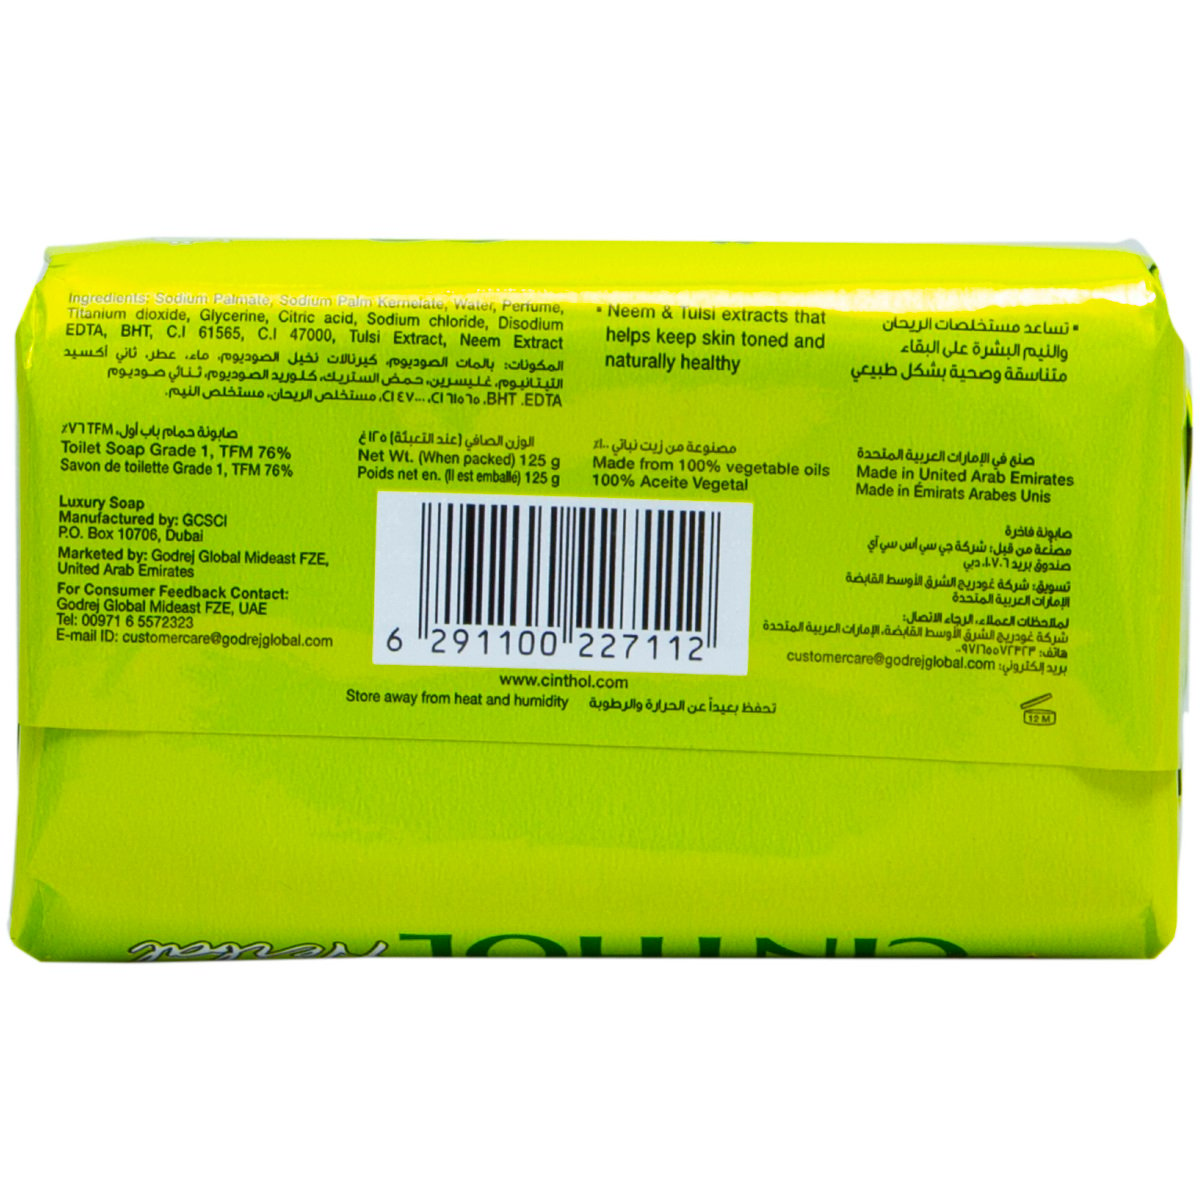 Cinthol Herbal With Deodorant Soap 125 g